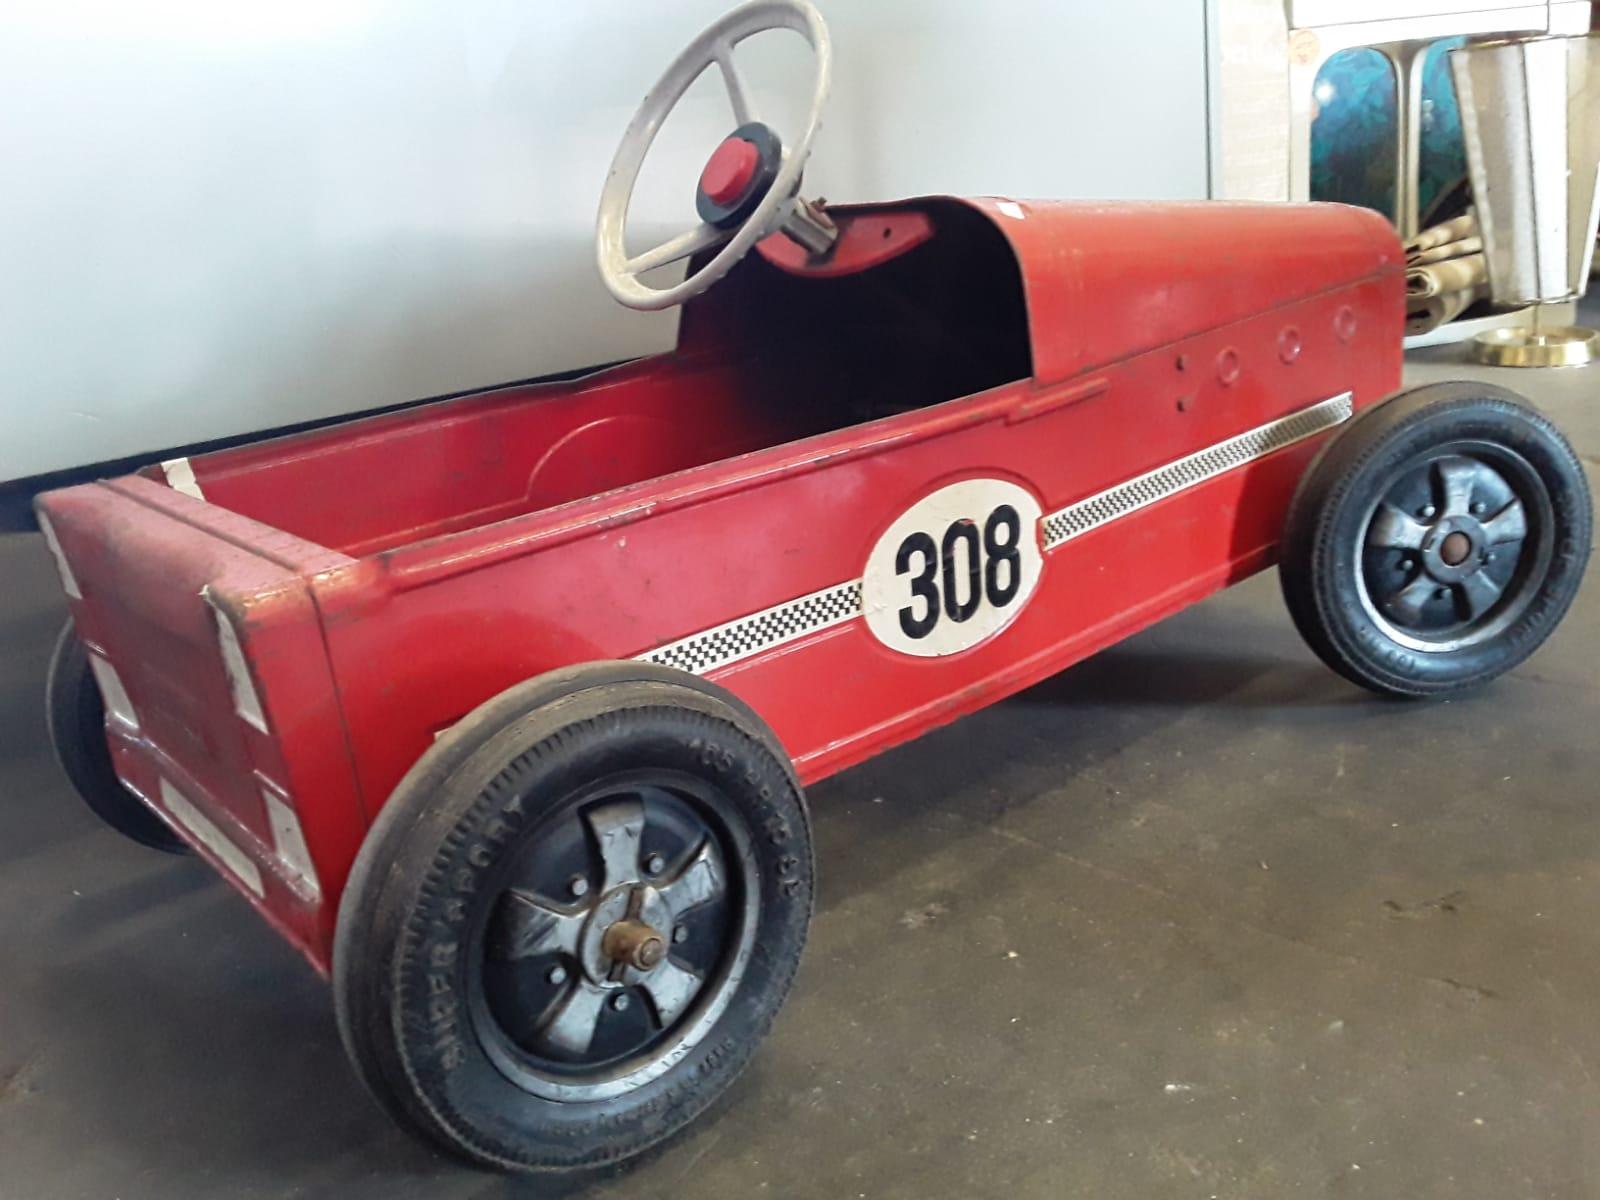 Beautiful children's toy from the 1950s. With old and original paint. The piece is fully functional and still usable as a pedal car.